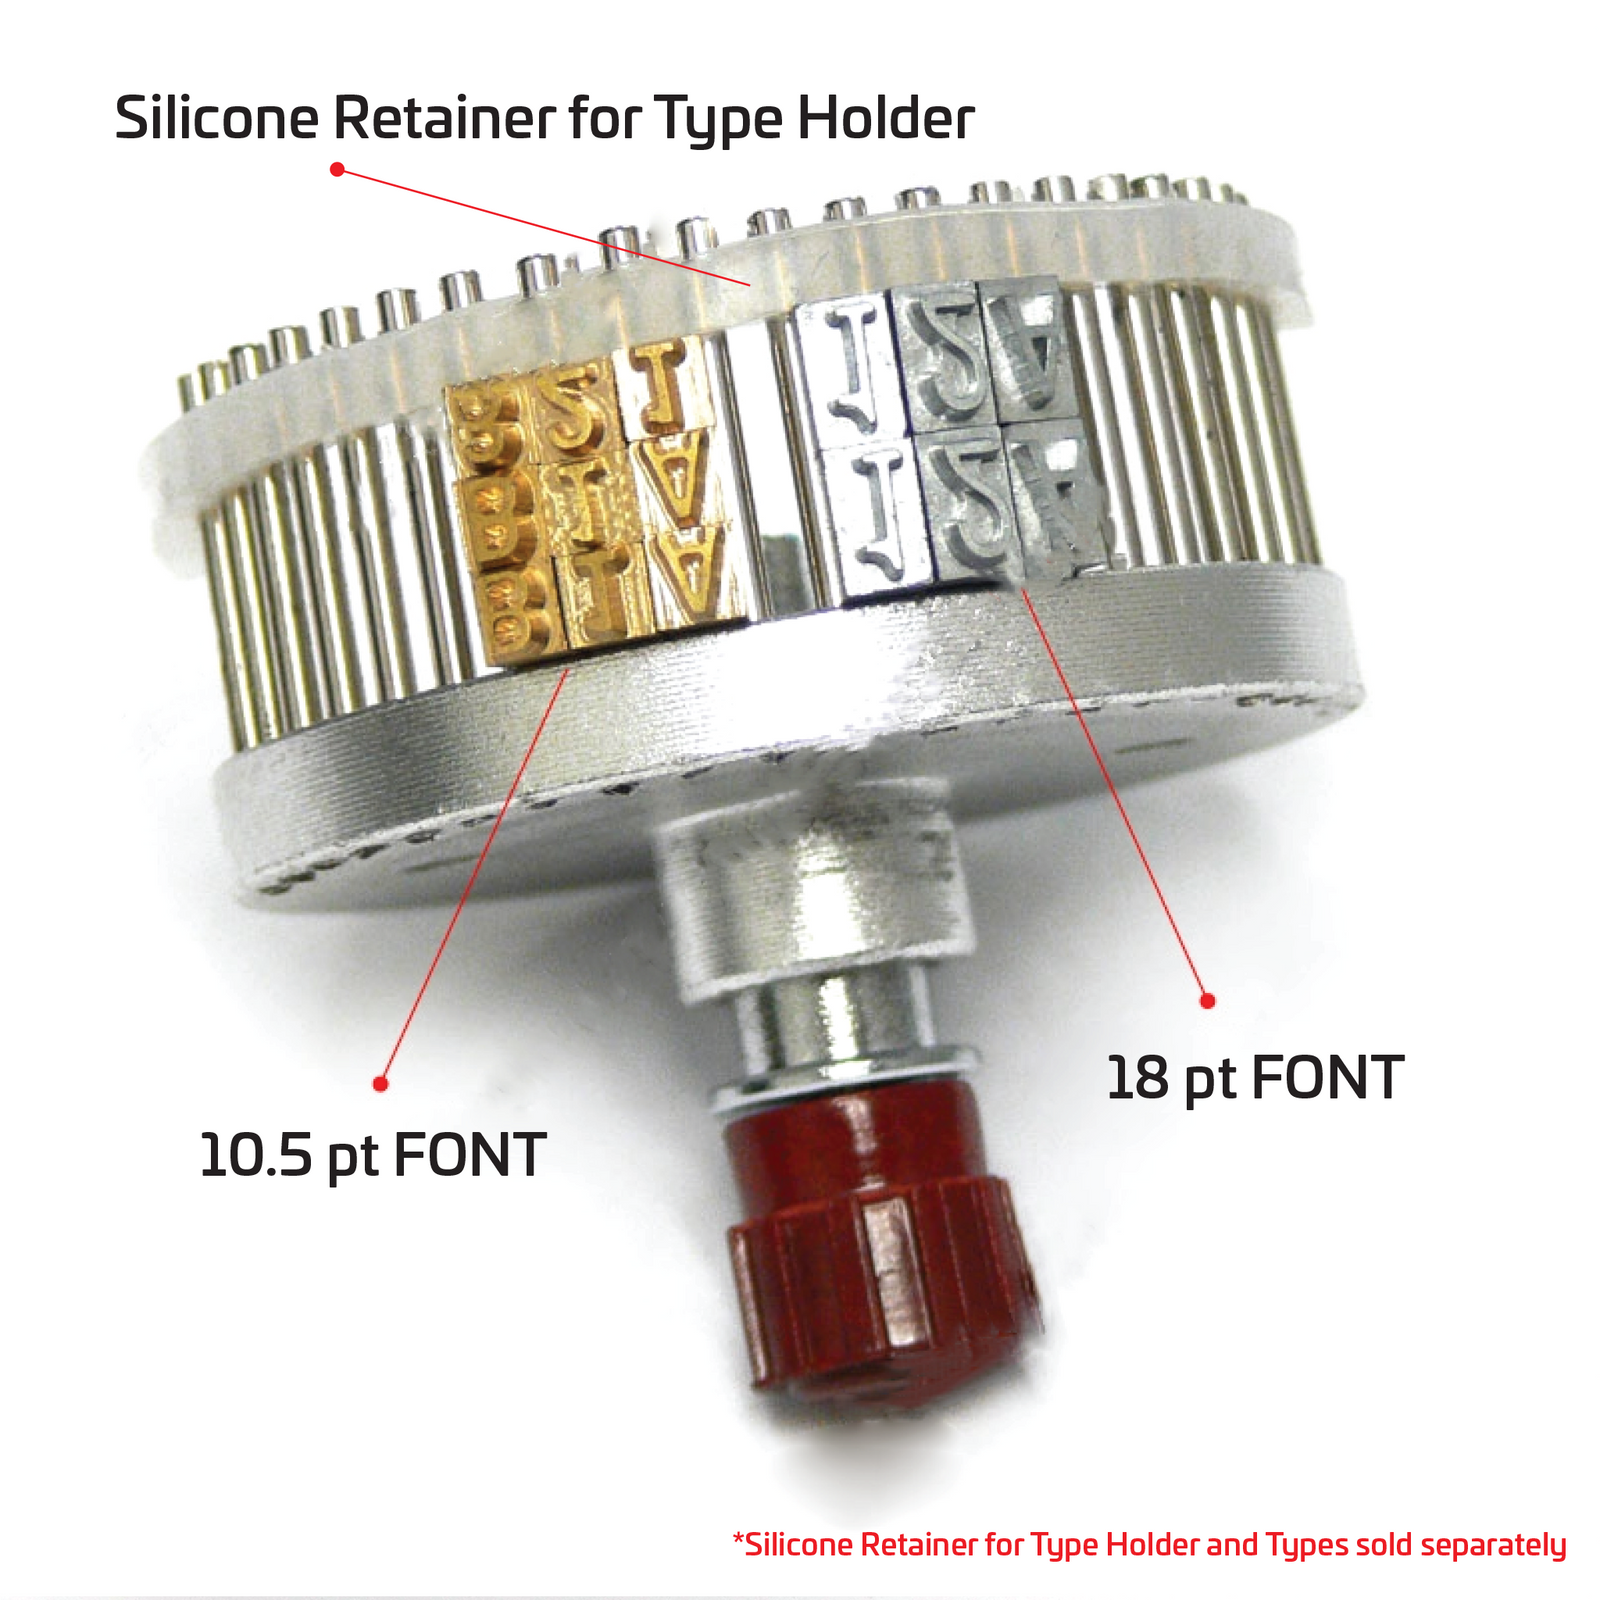 Type holder for hot ink roll printing and types that the JORES TECHNOLOGIES® continuous Band sealer with coder used. Text mentions and shows the size of fonts used are 10.5 pt and 18 pt. It is also shown where the silicone retainer for type holder is placed and it states that types and retainer are sold separately